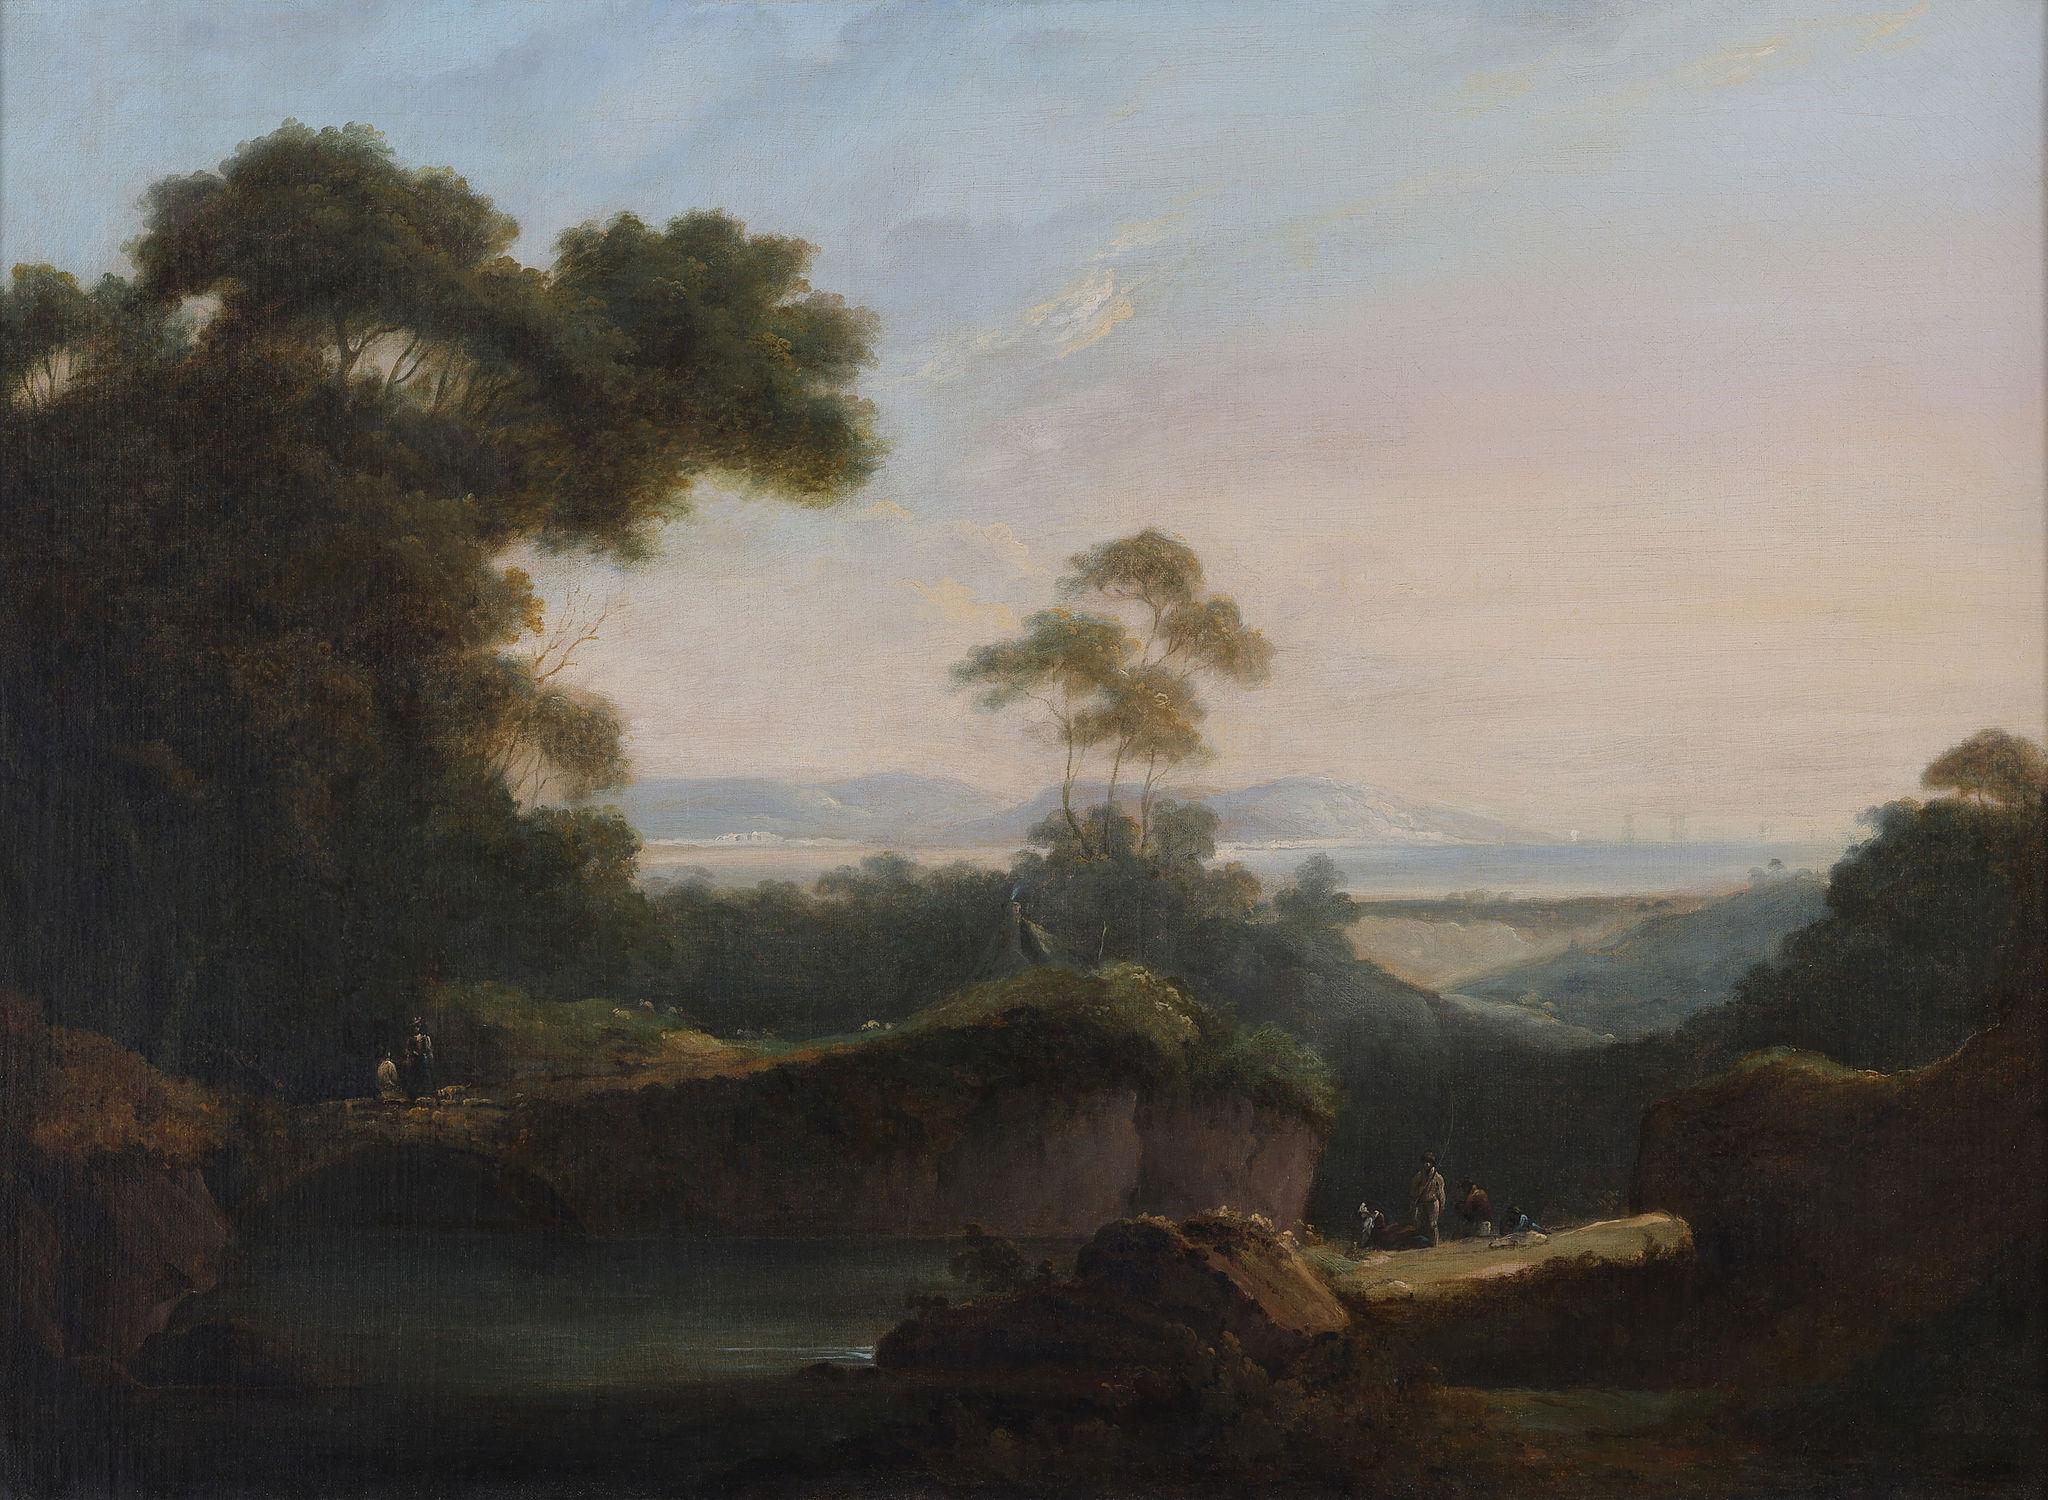 The Travellers - Painting by Richard Wilson R.A.